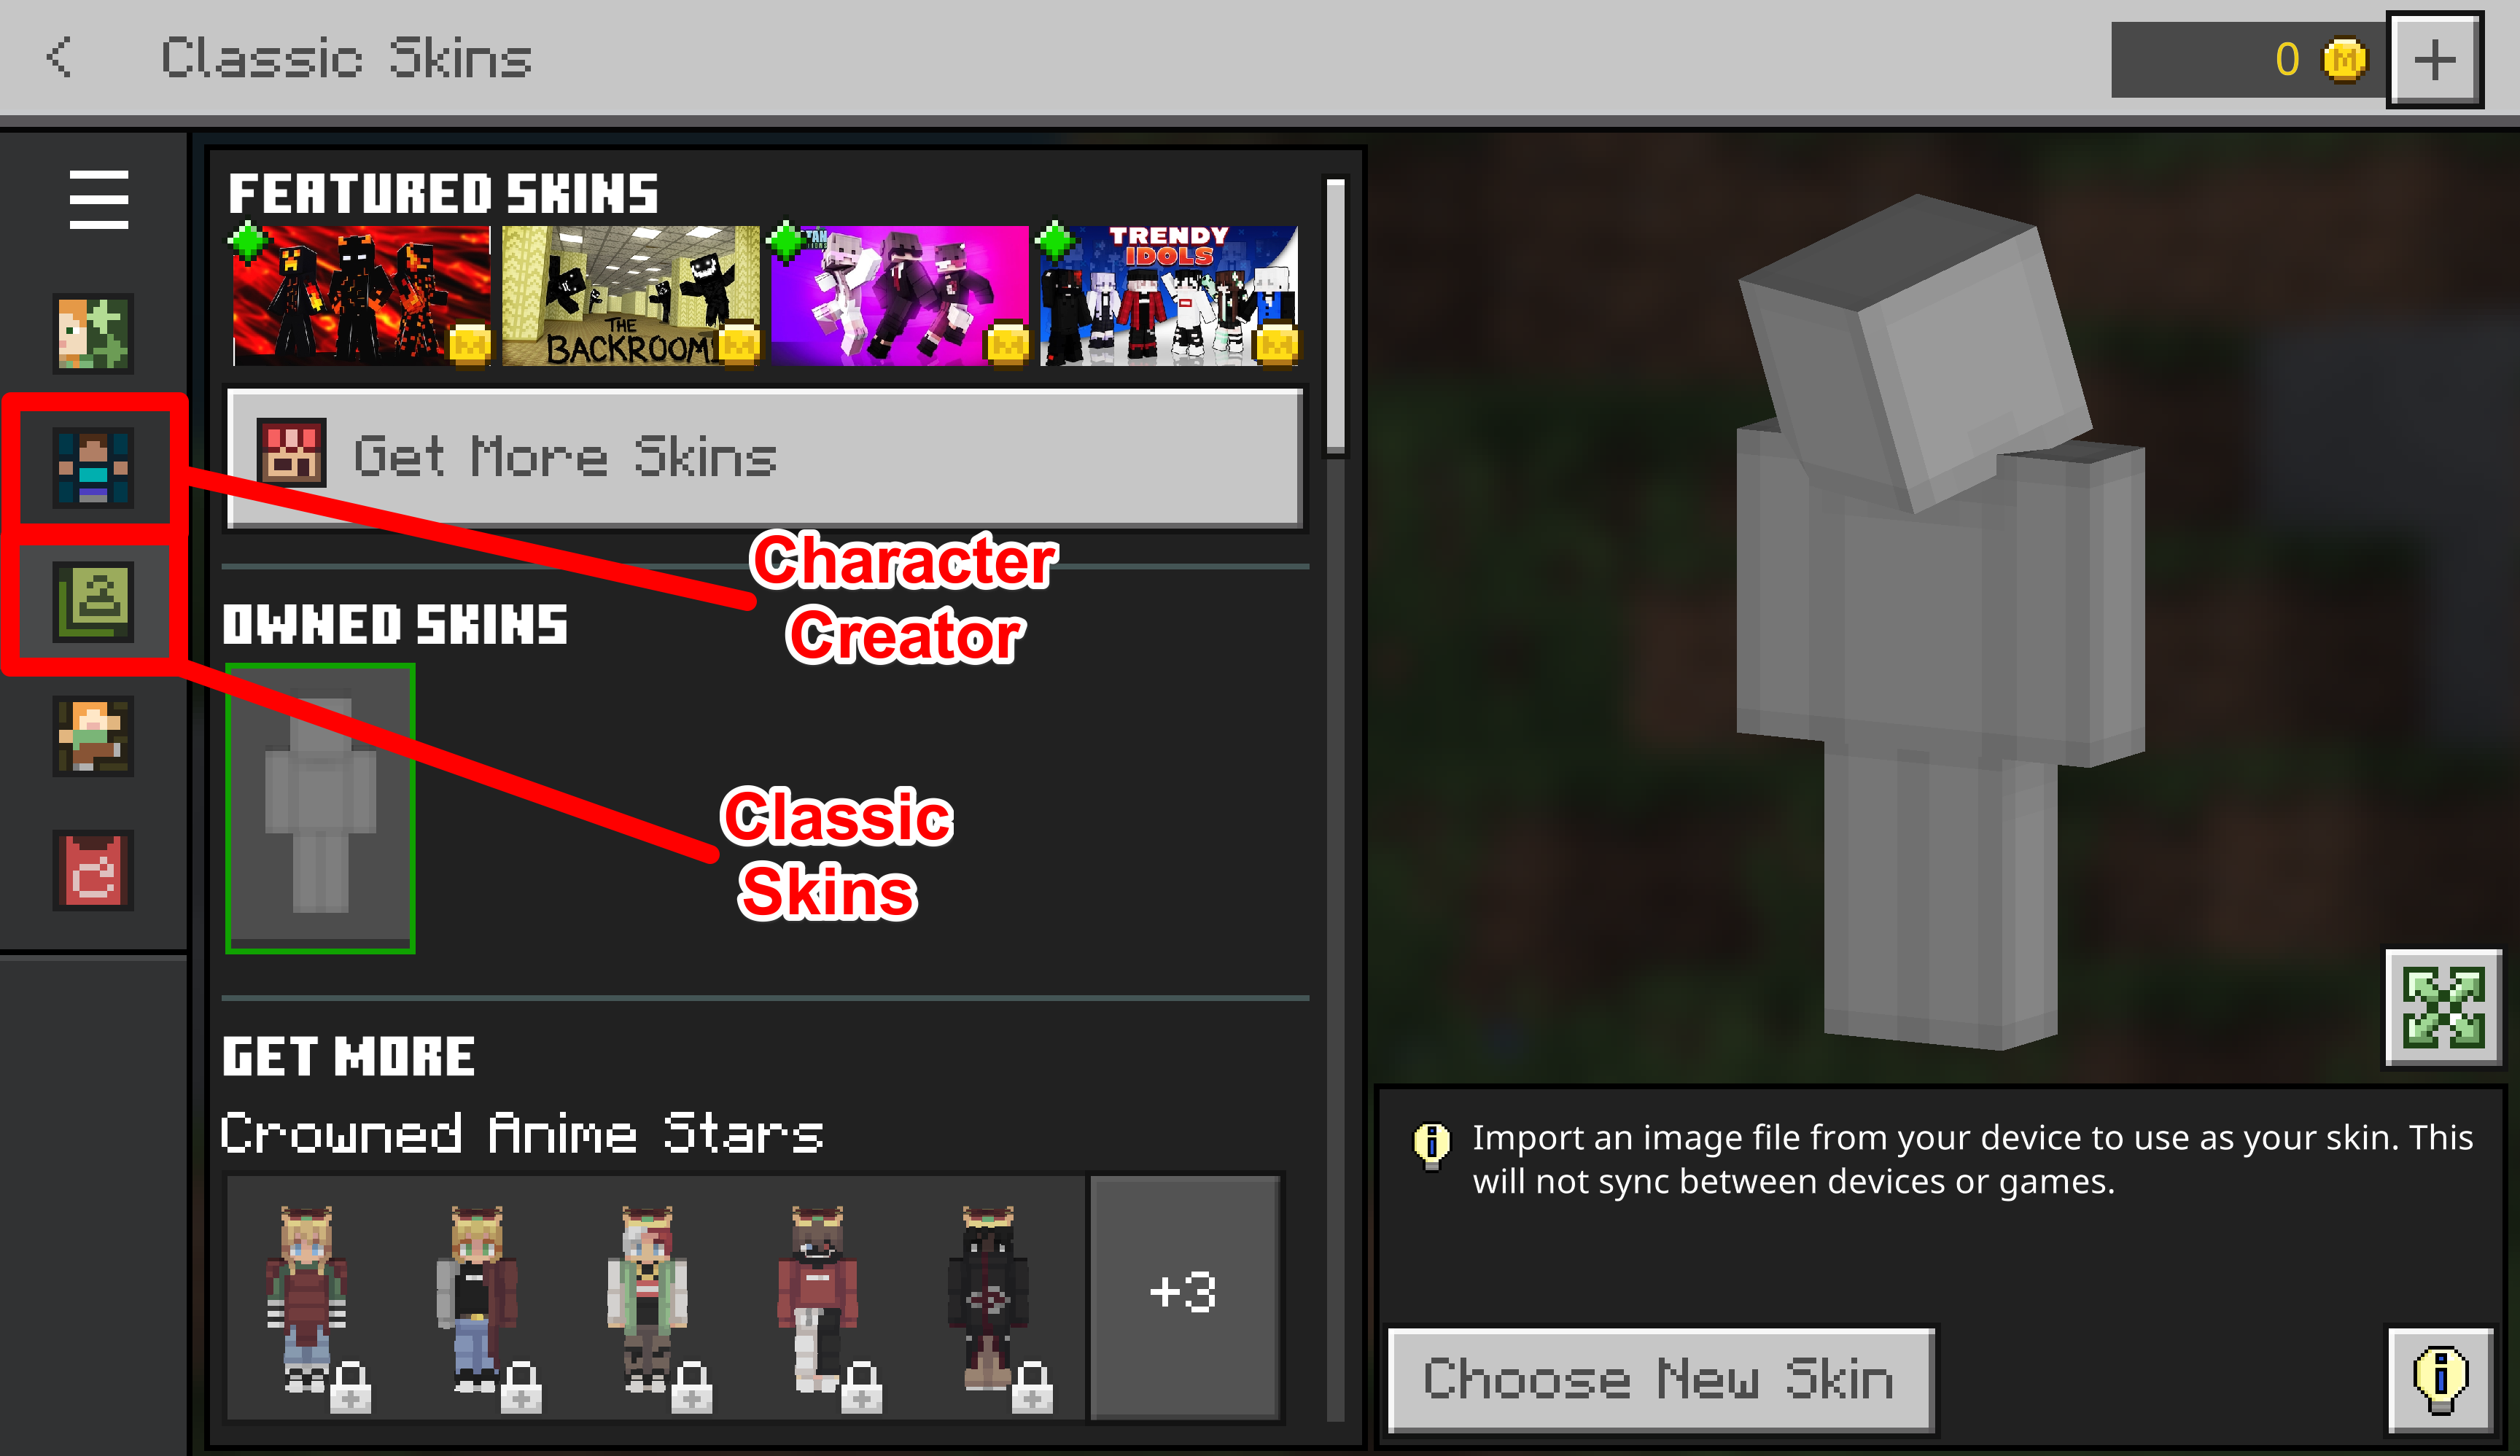 Red arrows pointing to the two icons to change your character’s skin, called Character Creator and Classic Skins.